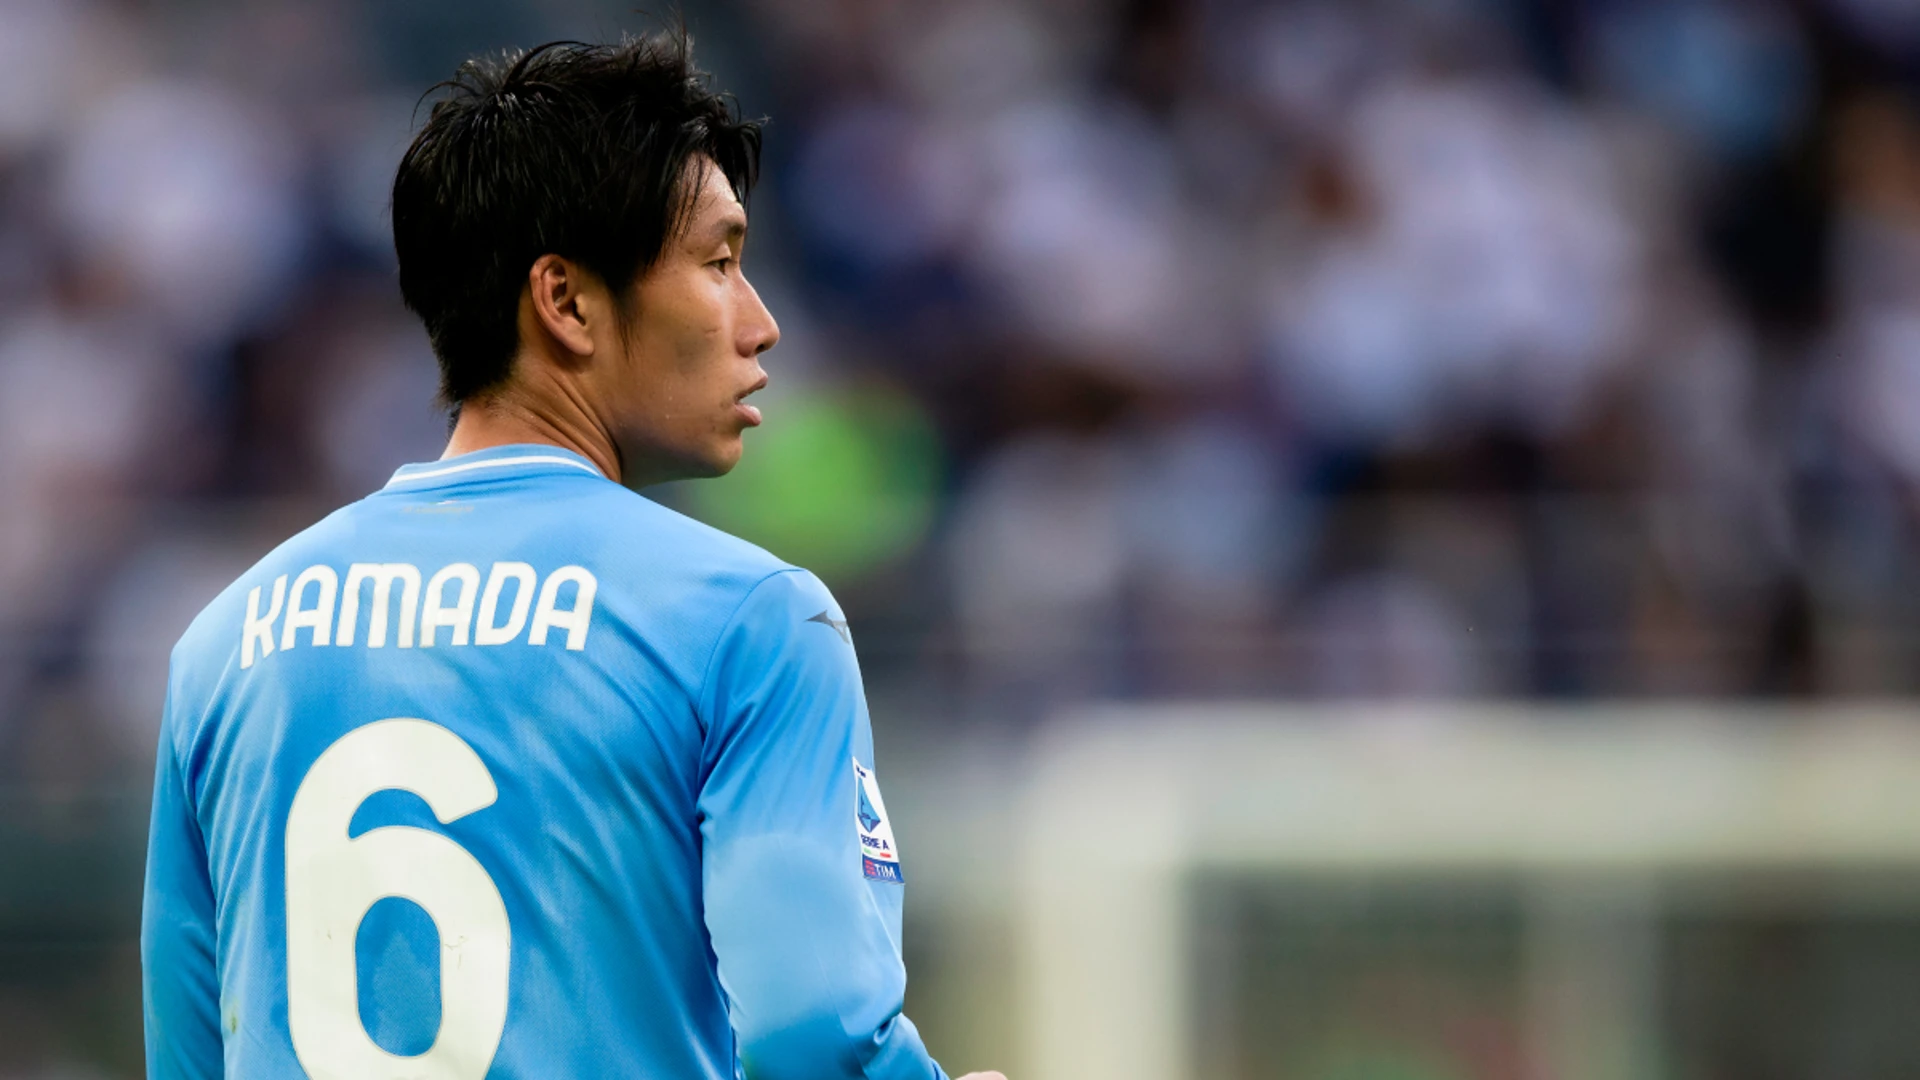 Japan's Kamada moves to Palace on free transfer from Lazio